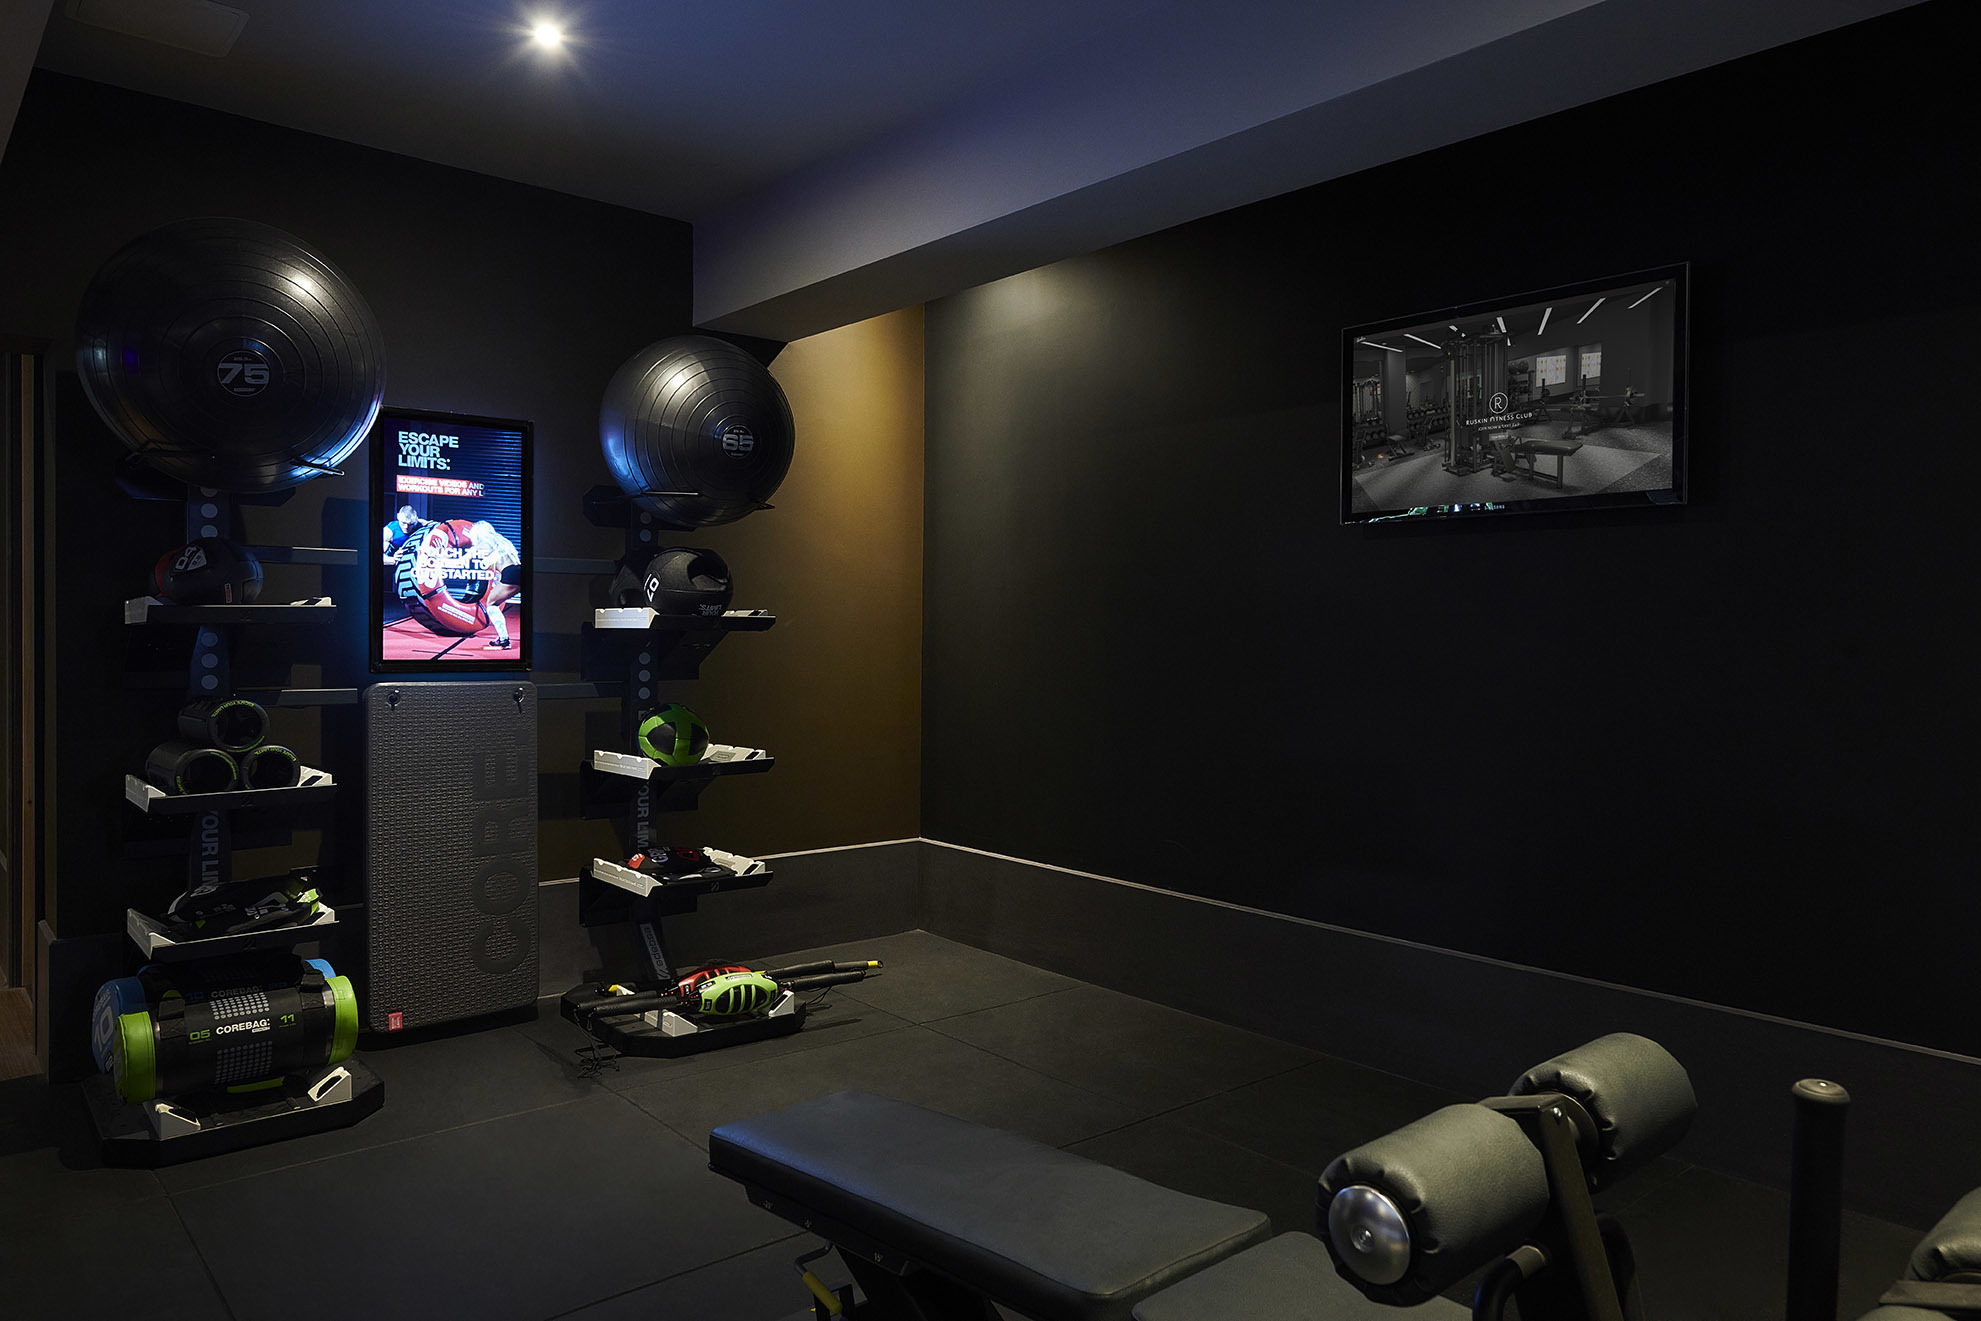 Members can enjoy a personalised workout experience at Ruskin